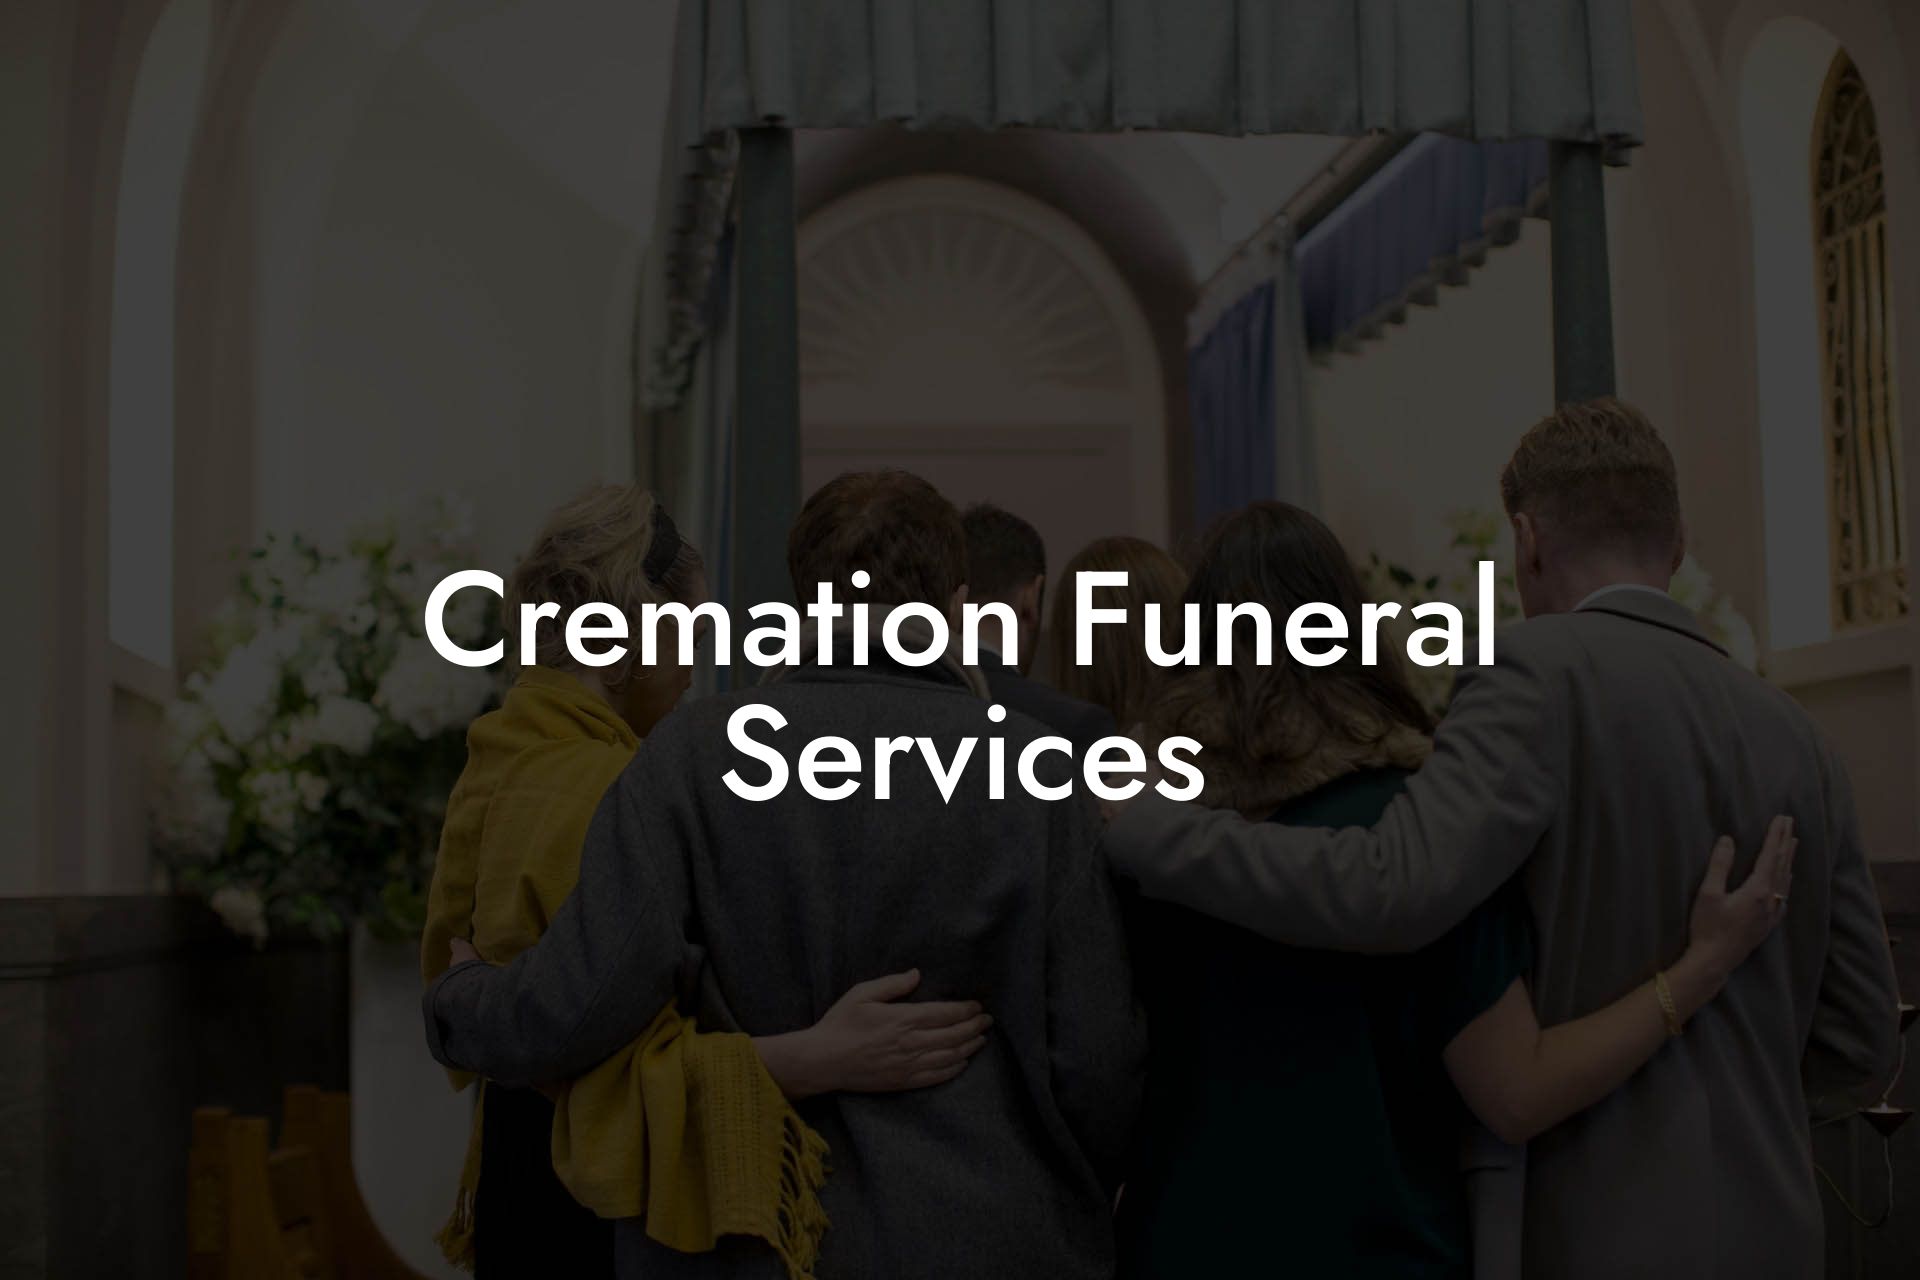 Cremation Funeral Services